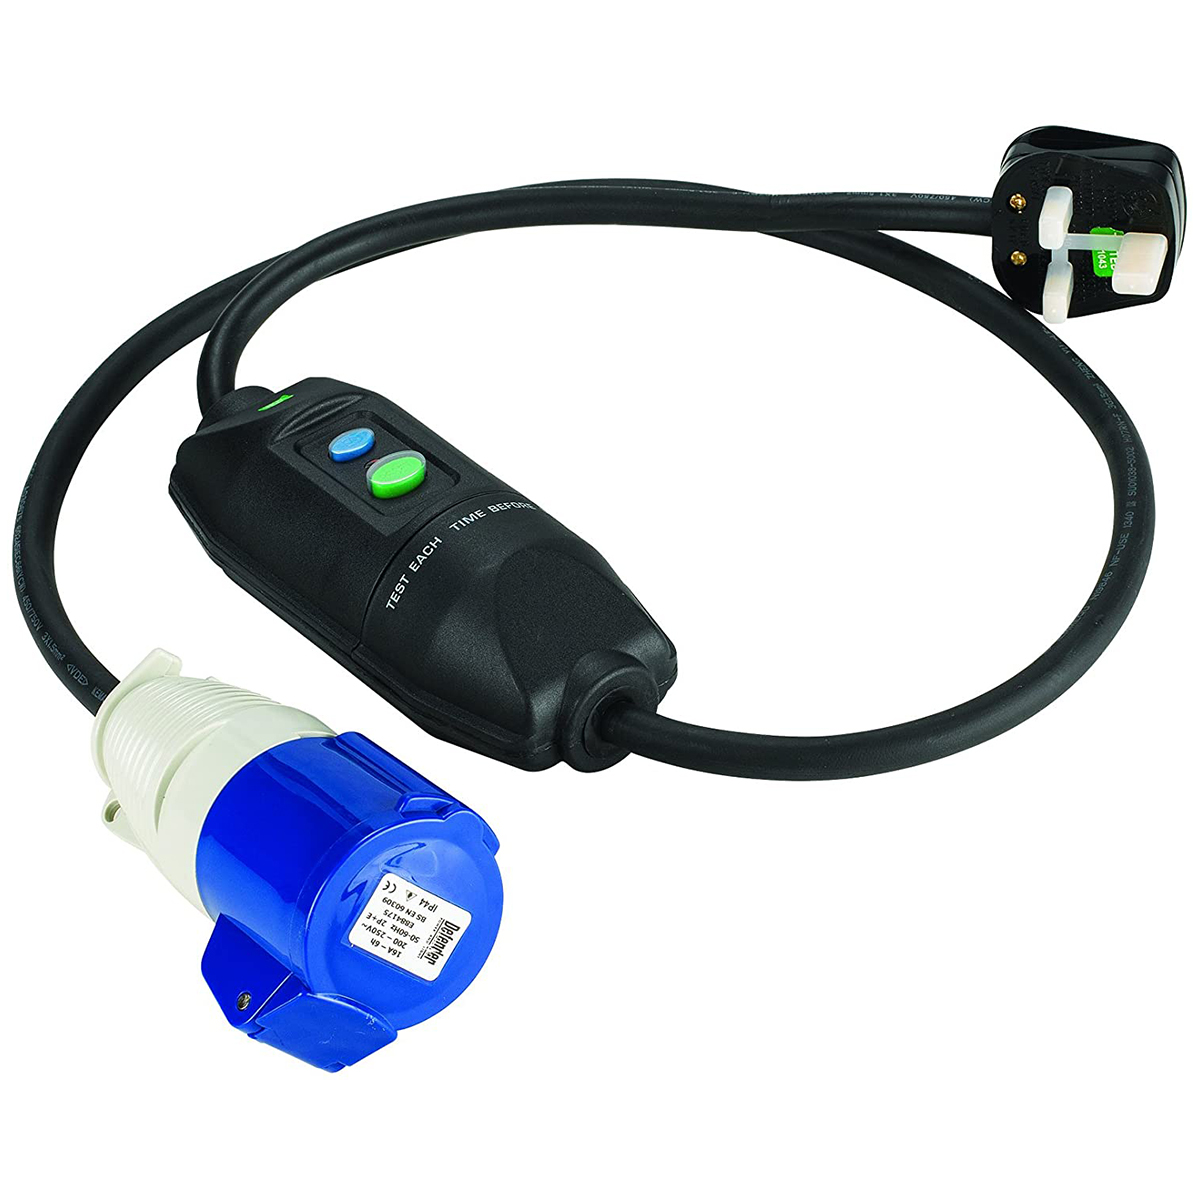 Defender 13a - 16a Fly Lead 240V with In-Line RCD Unit